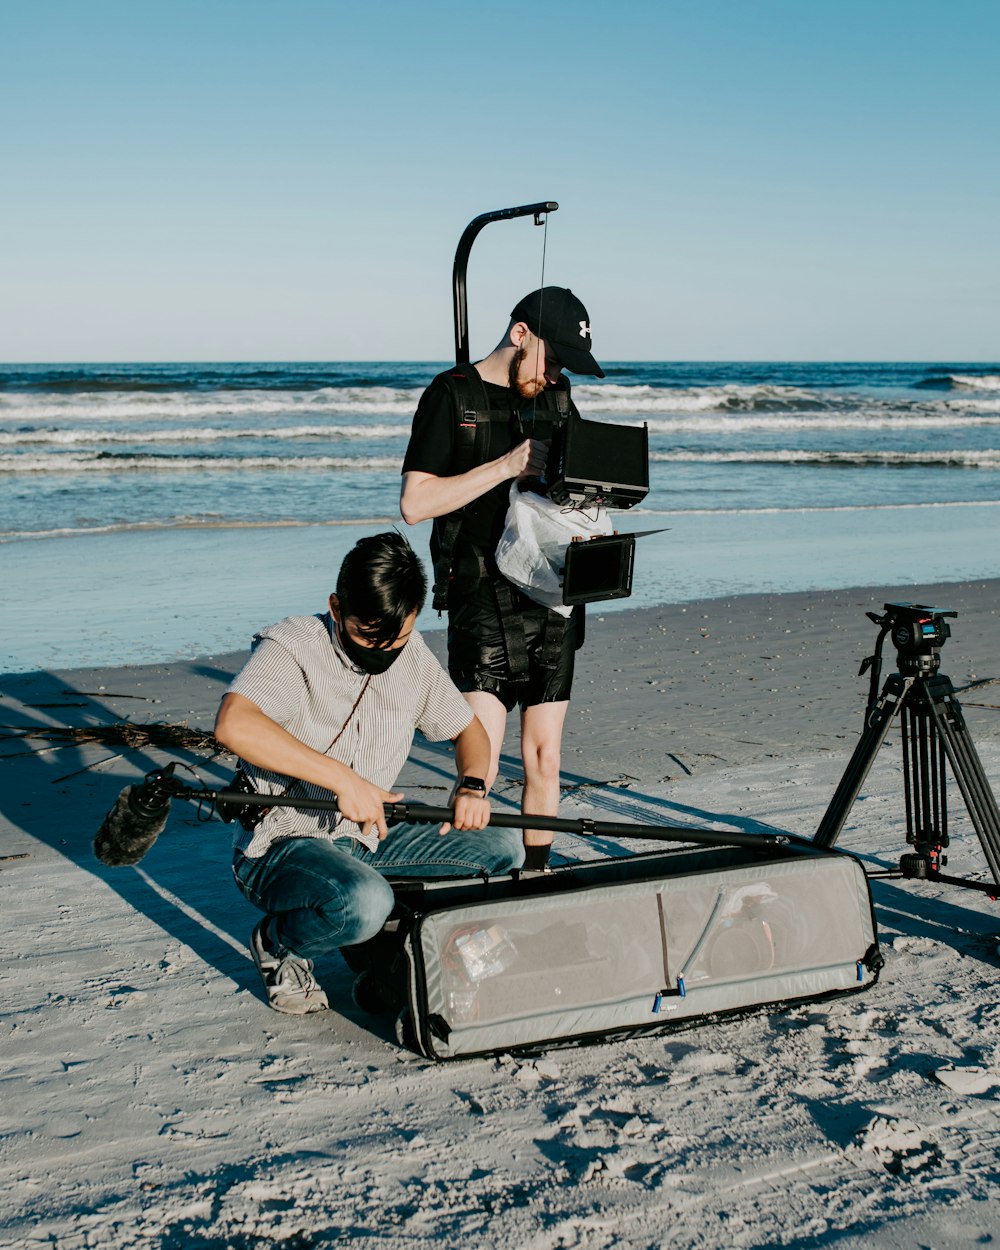 Two people with sound equipment on a beach, creating whoosh sound effects